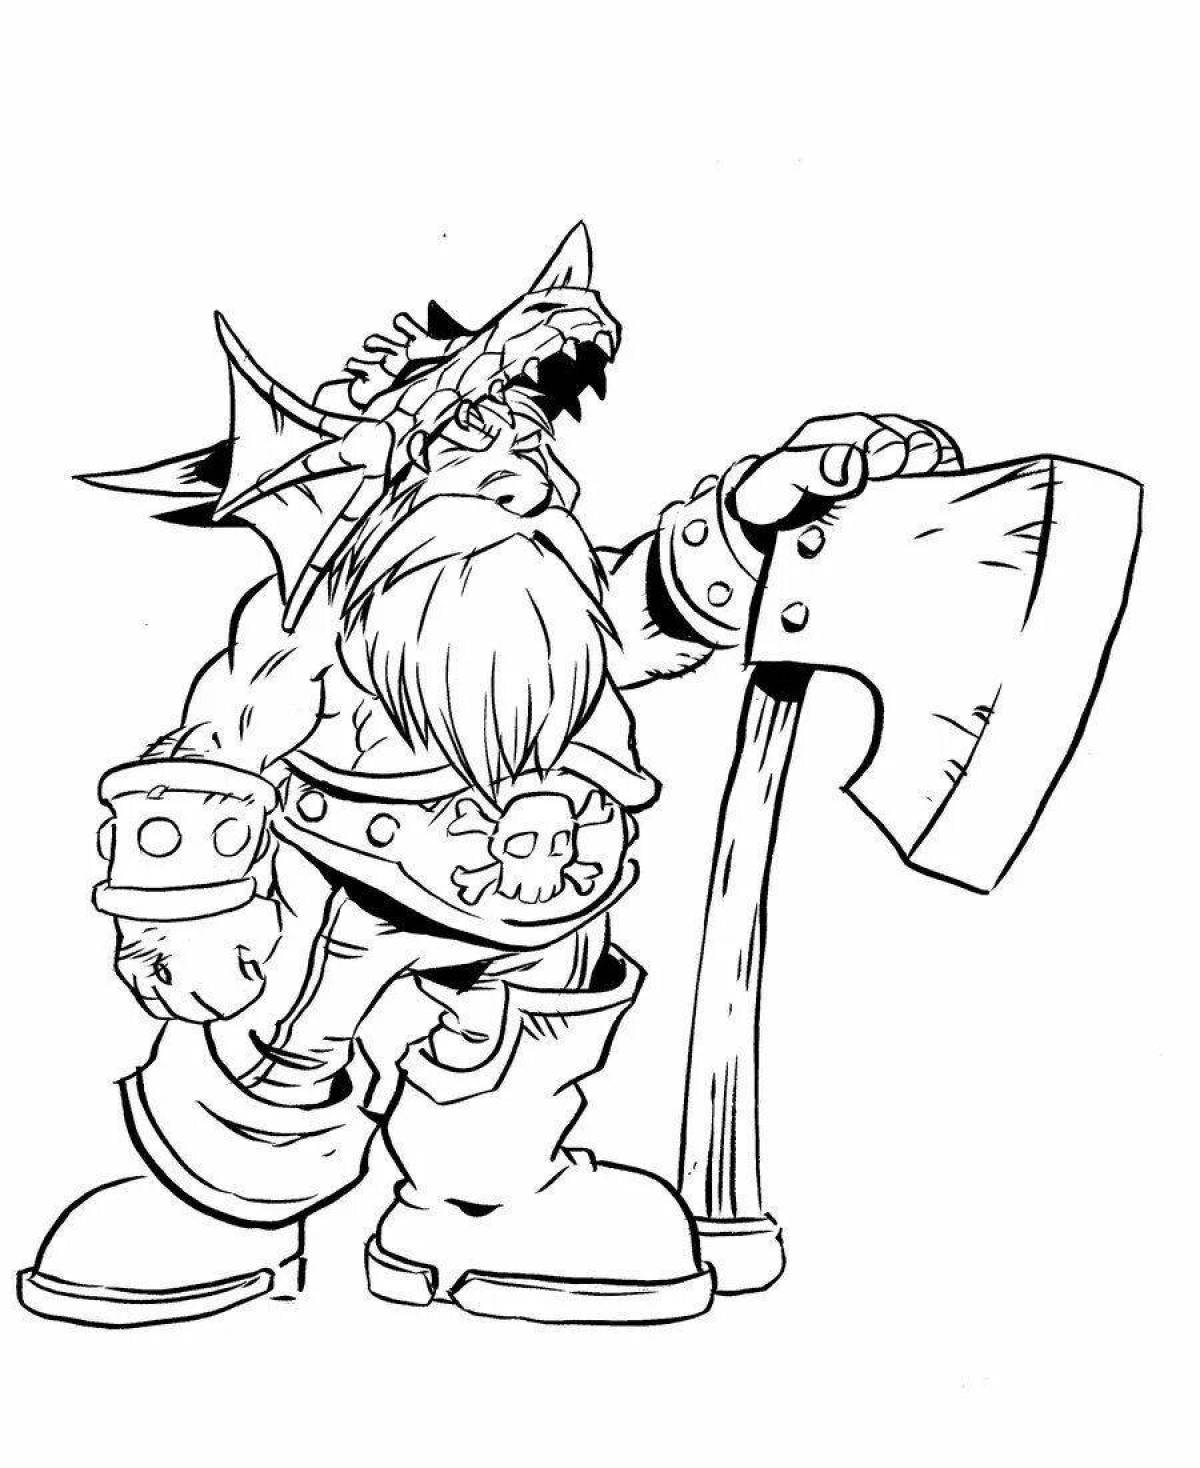 Charm warcraft 3 coloring book